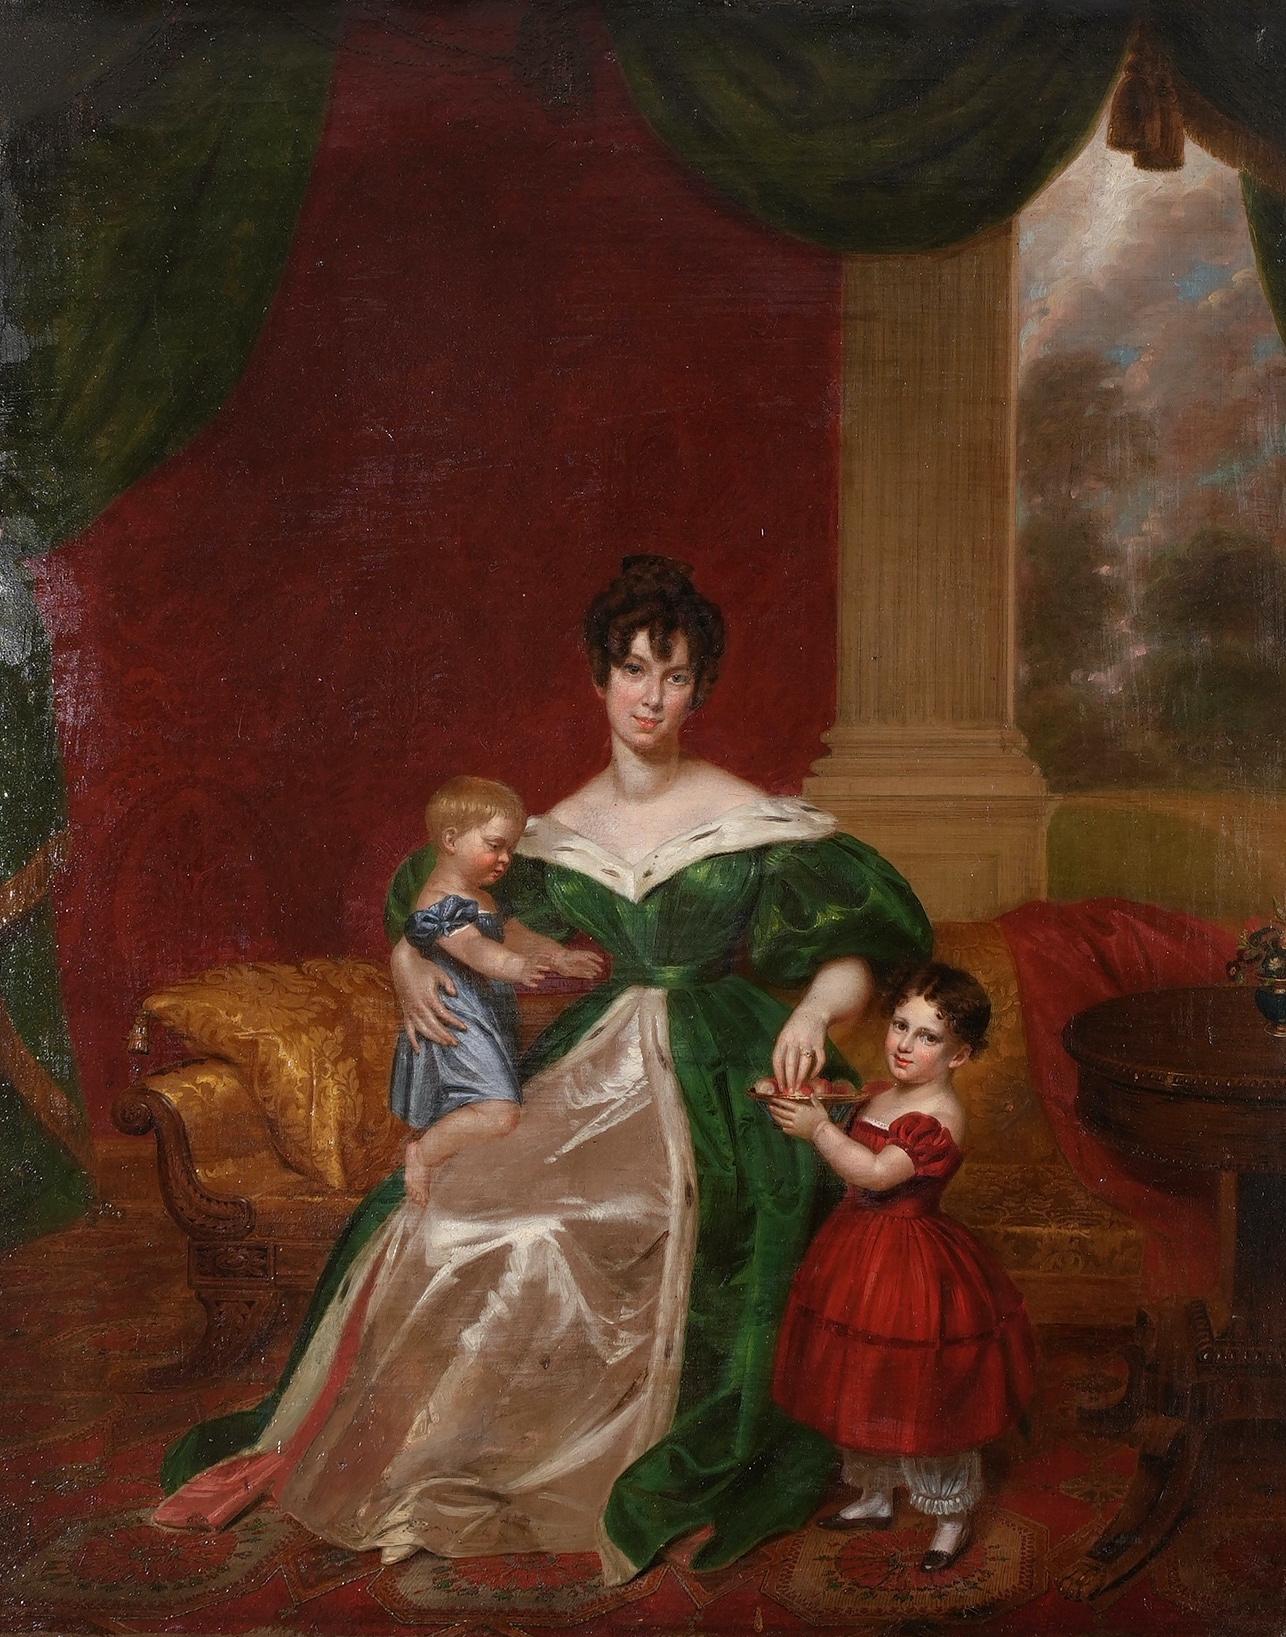 The term “Biedermeier” was first wielded as mildly disparaging designation for the bourgeois domesticity, so idealized by German society in the post-Napoleonic era prior to the 1848 revolutions. Though this painting is likely of French ancestry, it